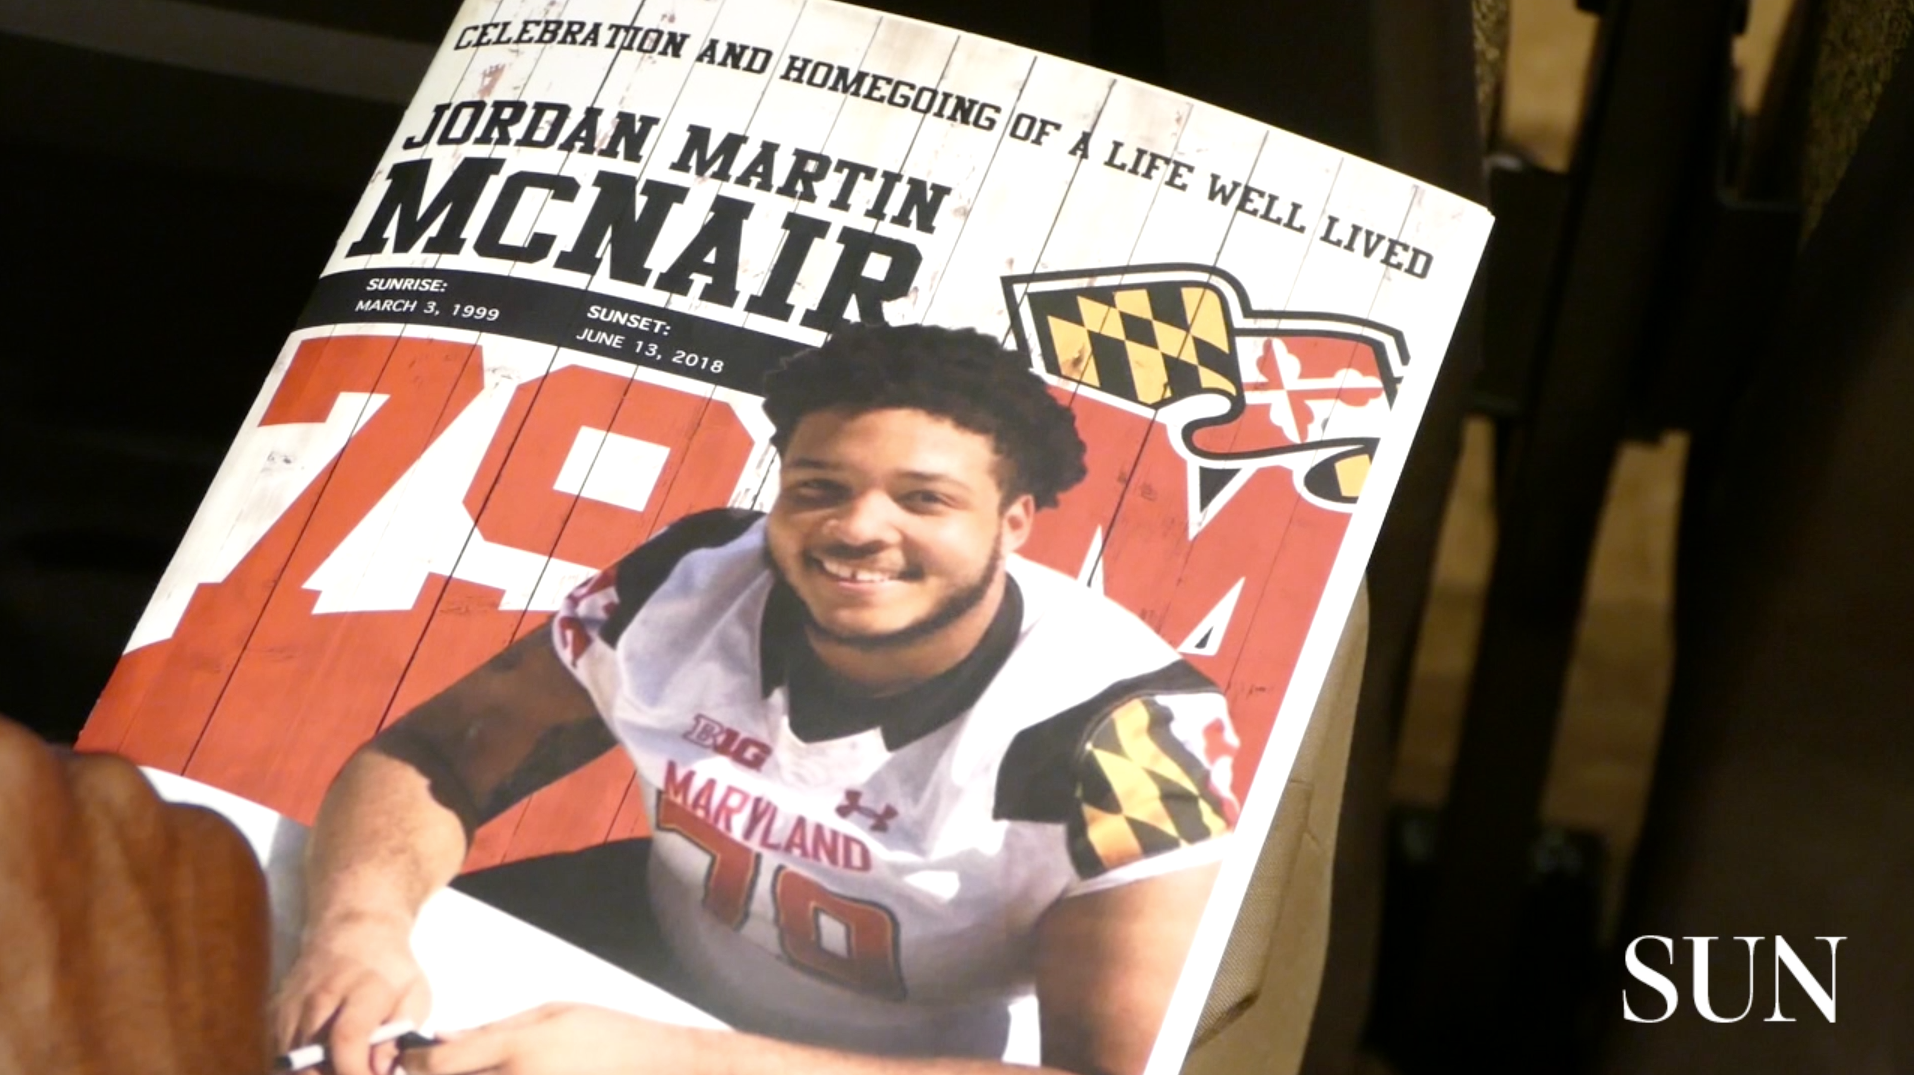 You couldn't have a better gift:' Community gathers for funeral of University of Maryland player - Baltimore Sun